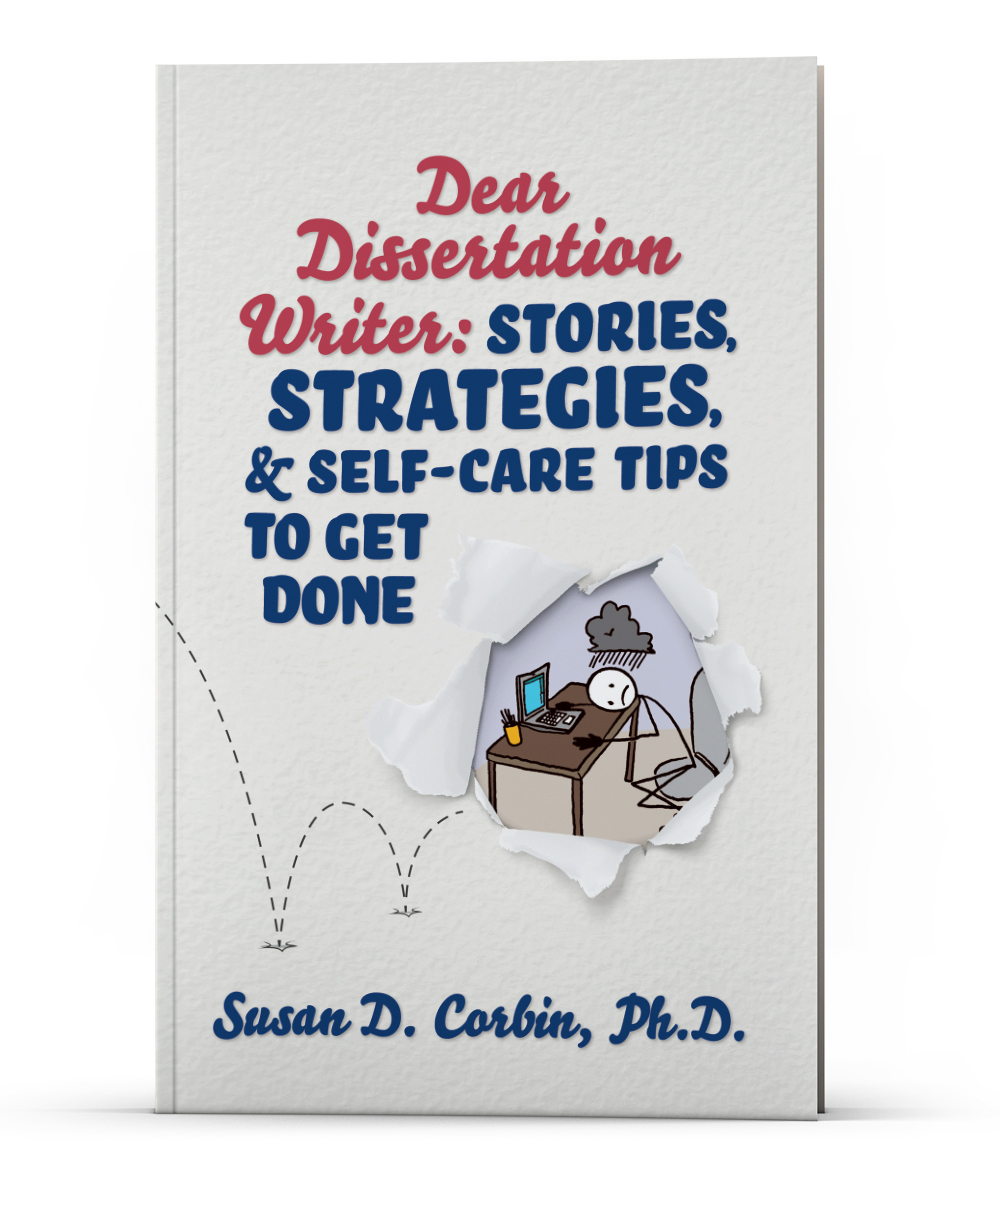 Dear Dissertation Writer: Strategies, Stories, & Self-Care Tips to Get Done by Susan D. Corbin, Ph.D.